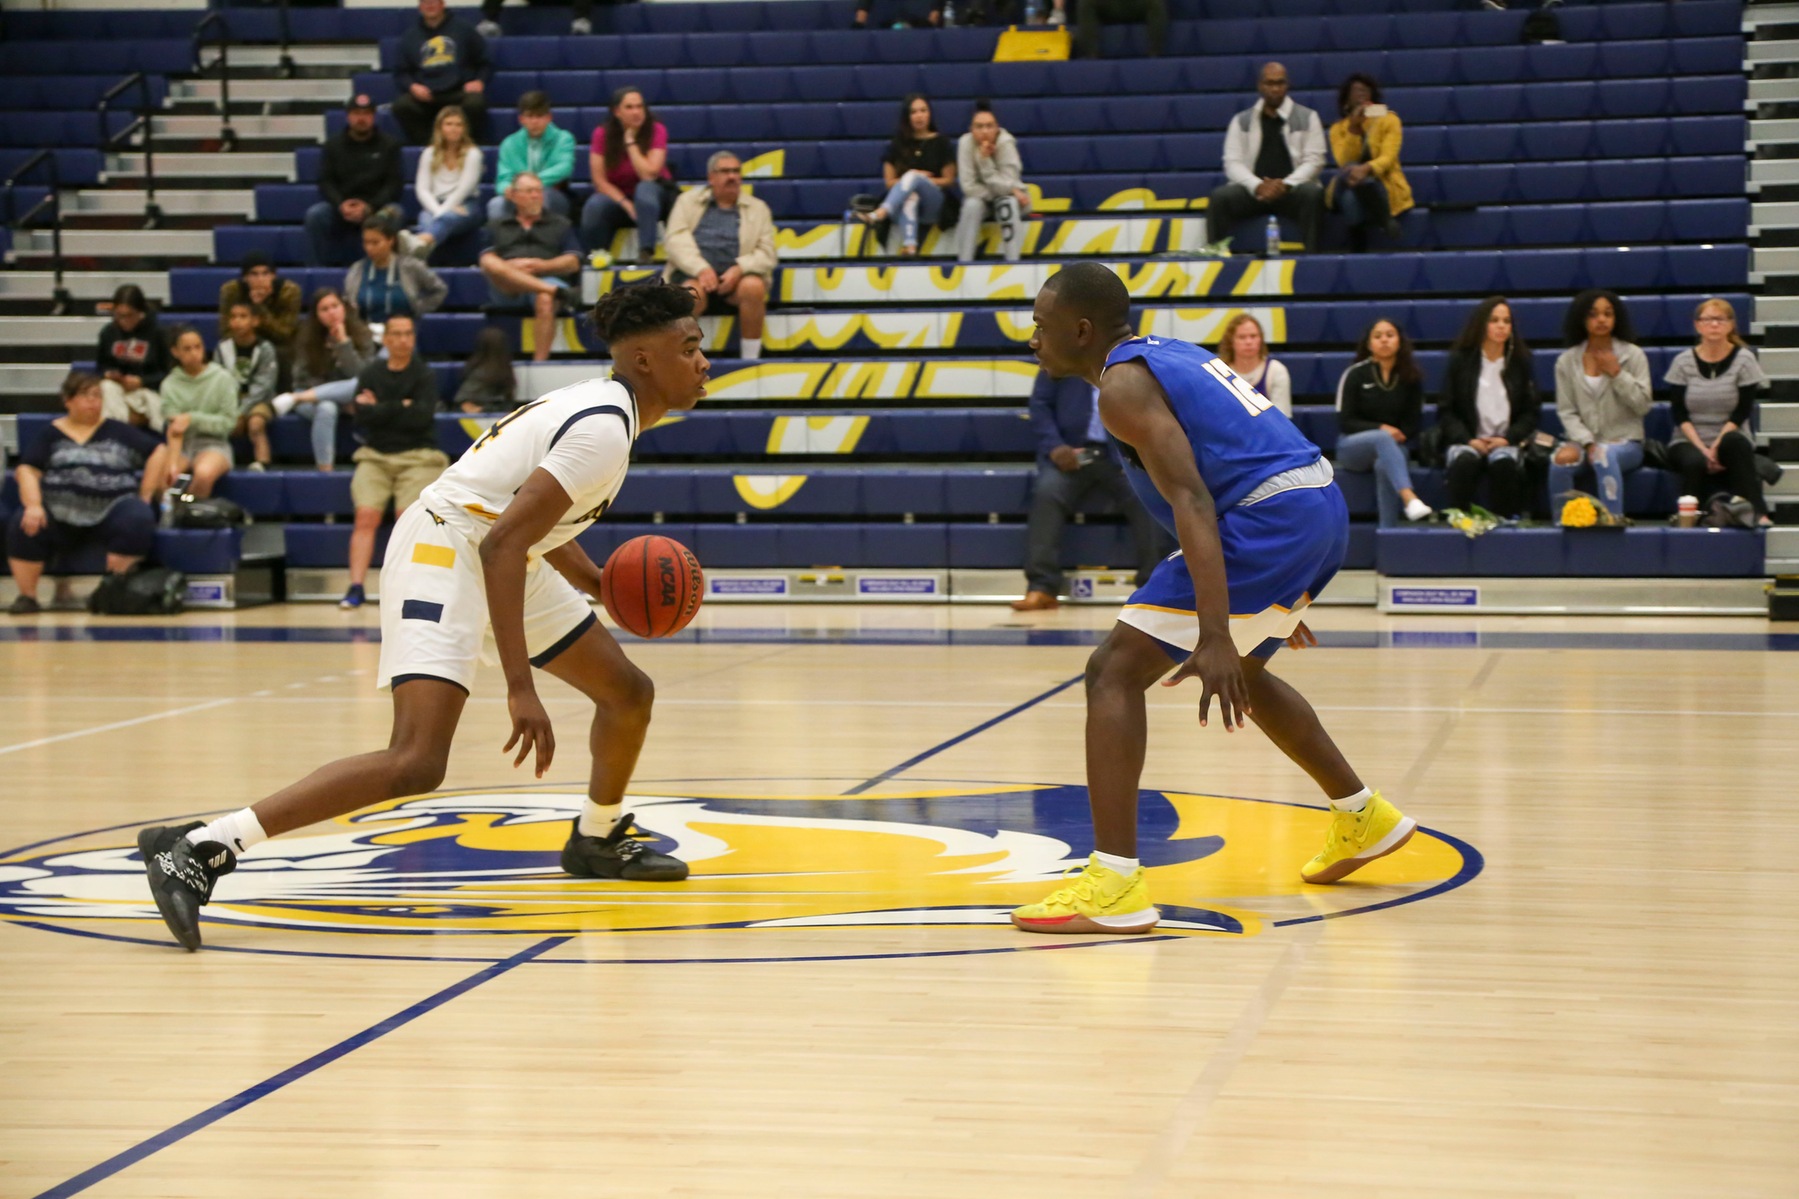 COC men's basketball student-athlete Christopher Bradford vs. West L.A. on Feb. 19, 2020 in the Cougar Cage.